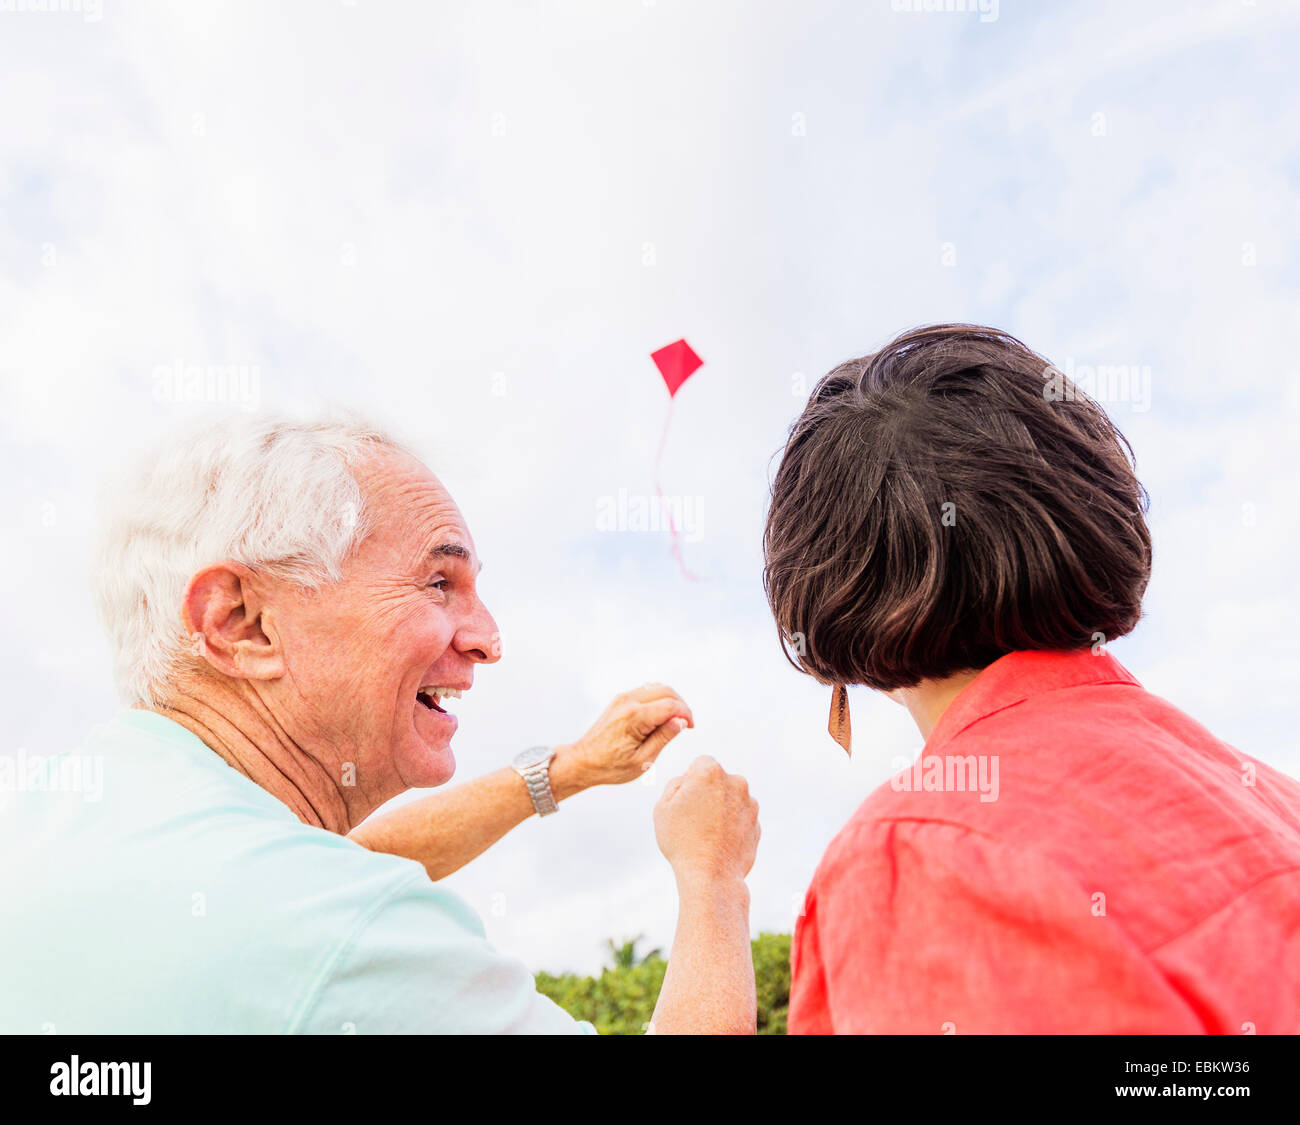 Faible angle view of couple flying kite ensemble Banque D'Images